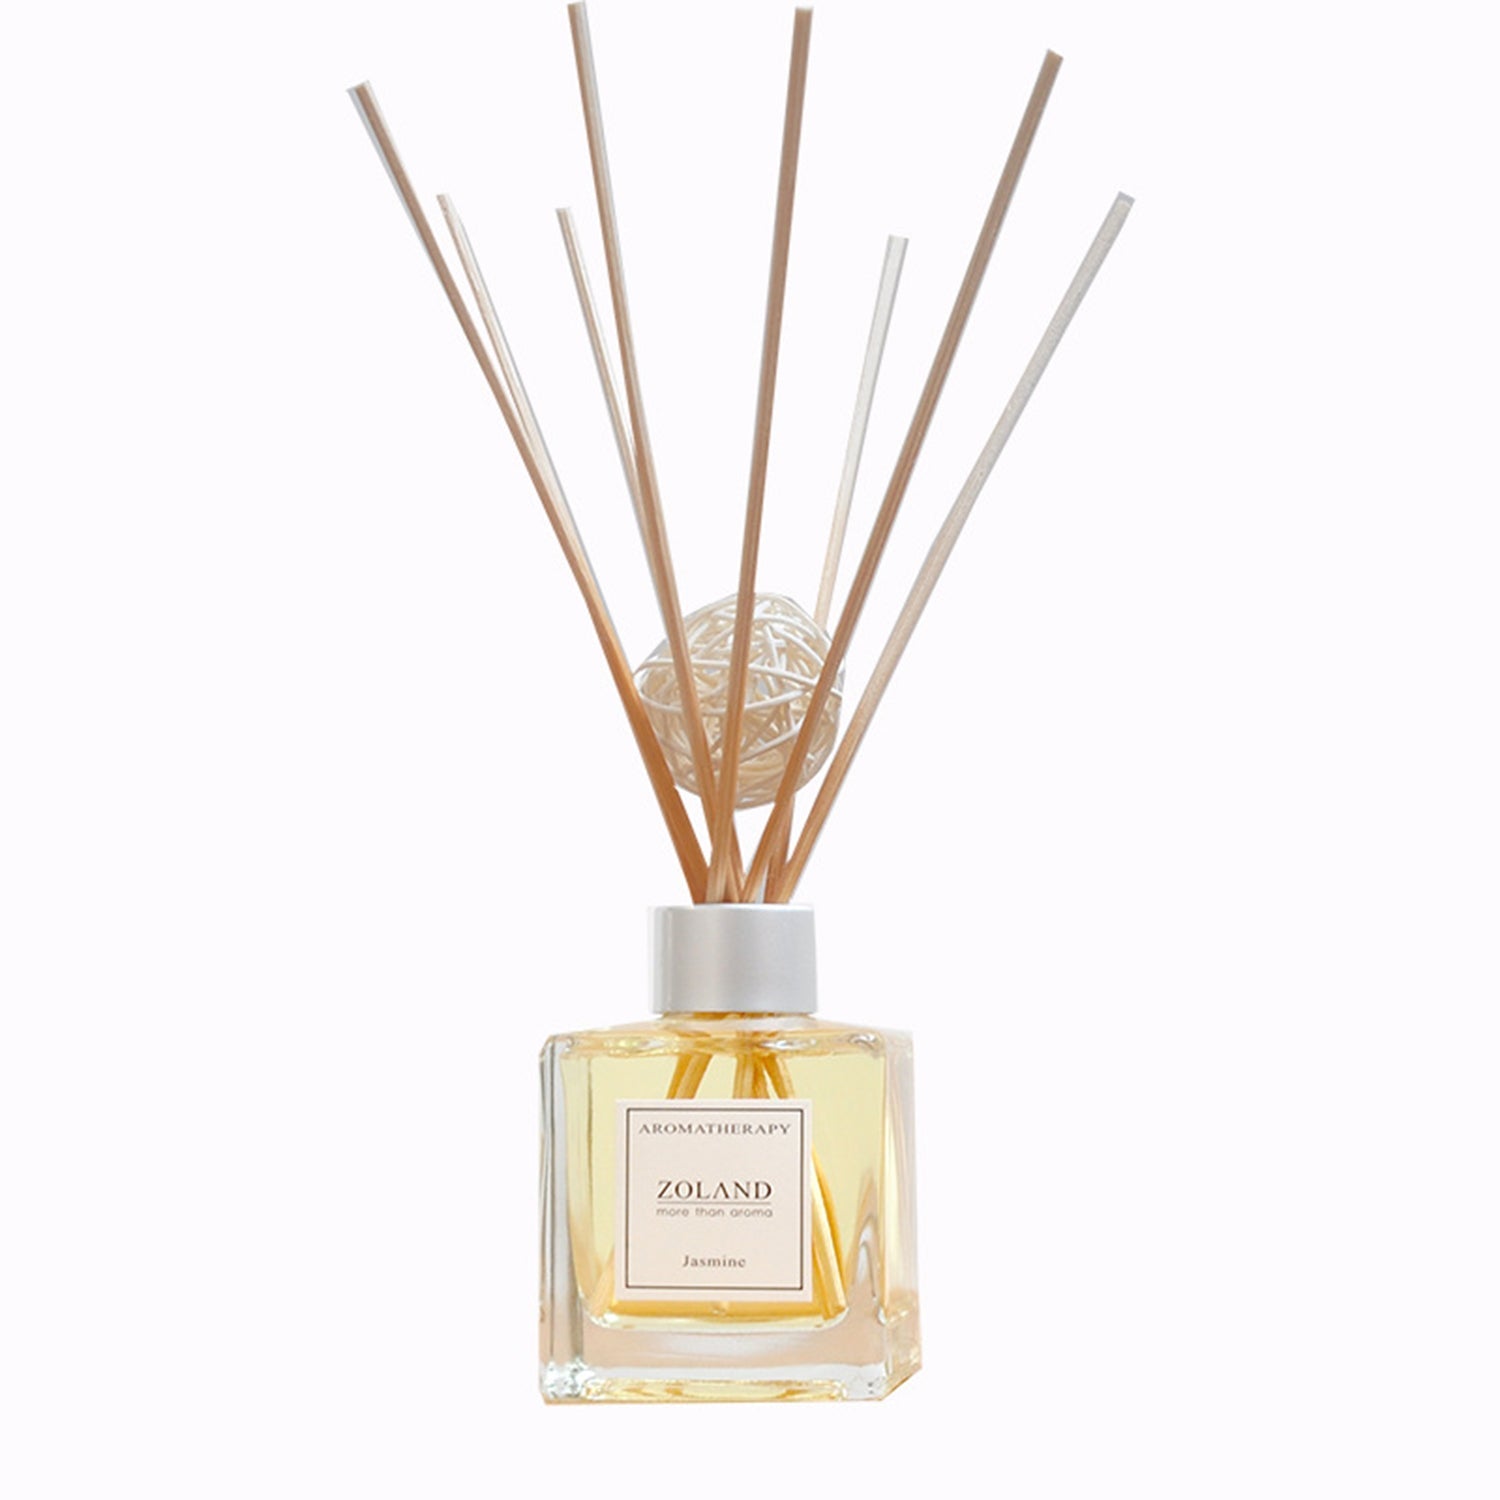 ZOLAND Reed Diffuser 150ML Premium Essential Oil Aromatherapy Square Bottle with Reed Stick Reed Diffuser ZOLAND Jasmine 